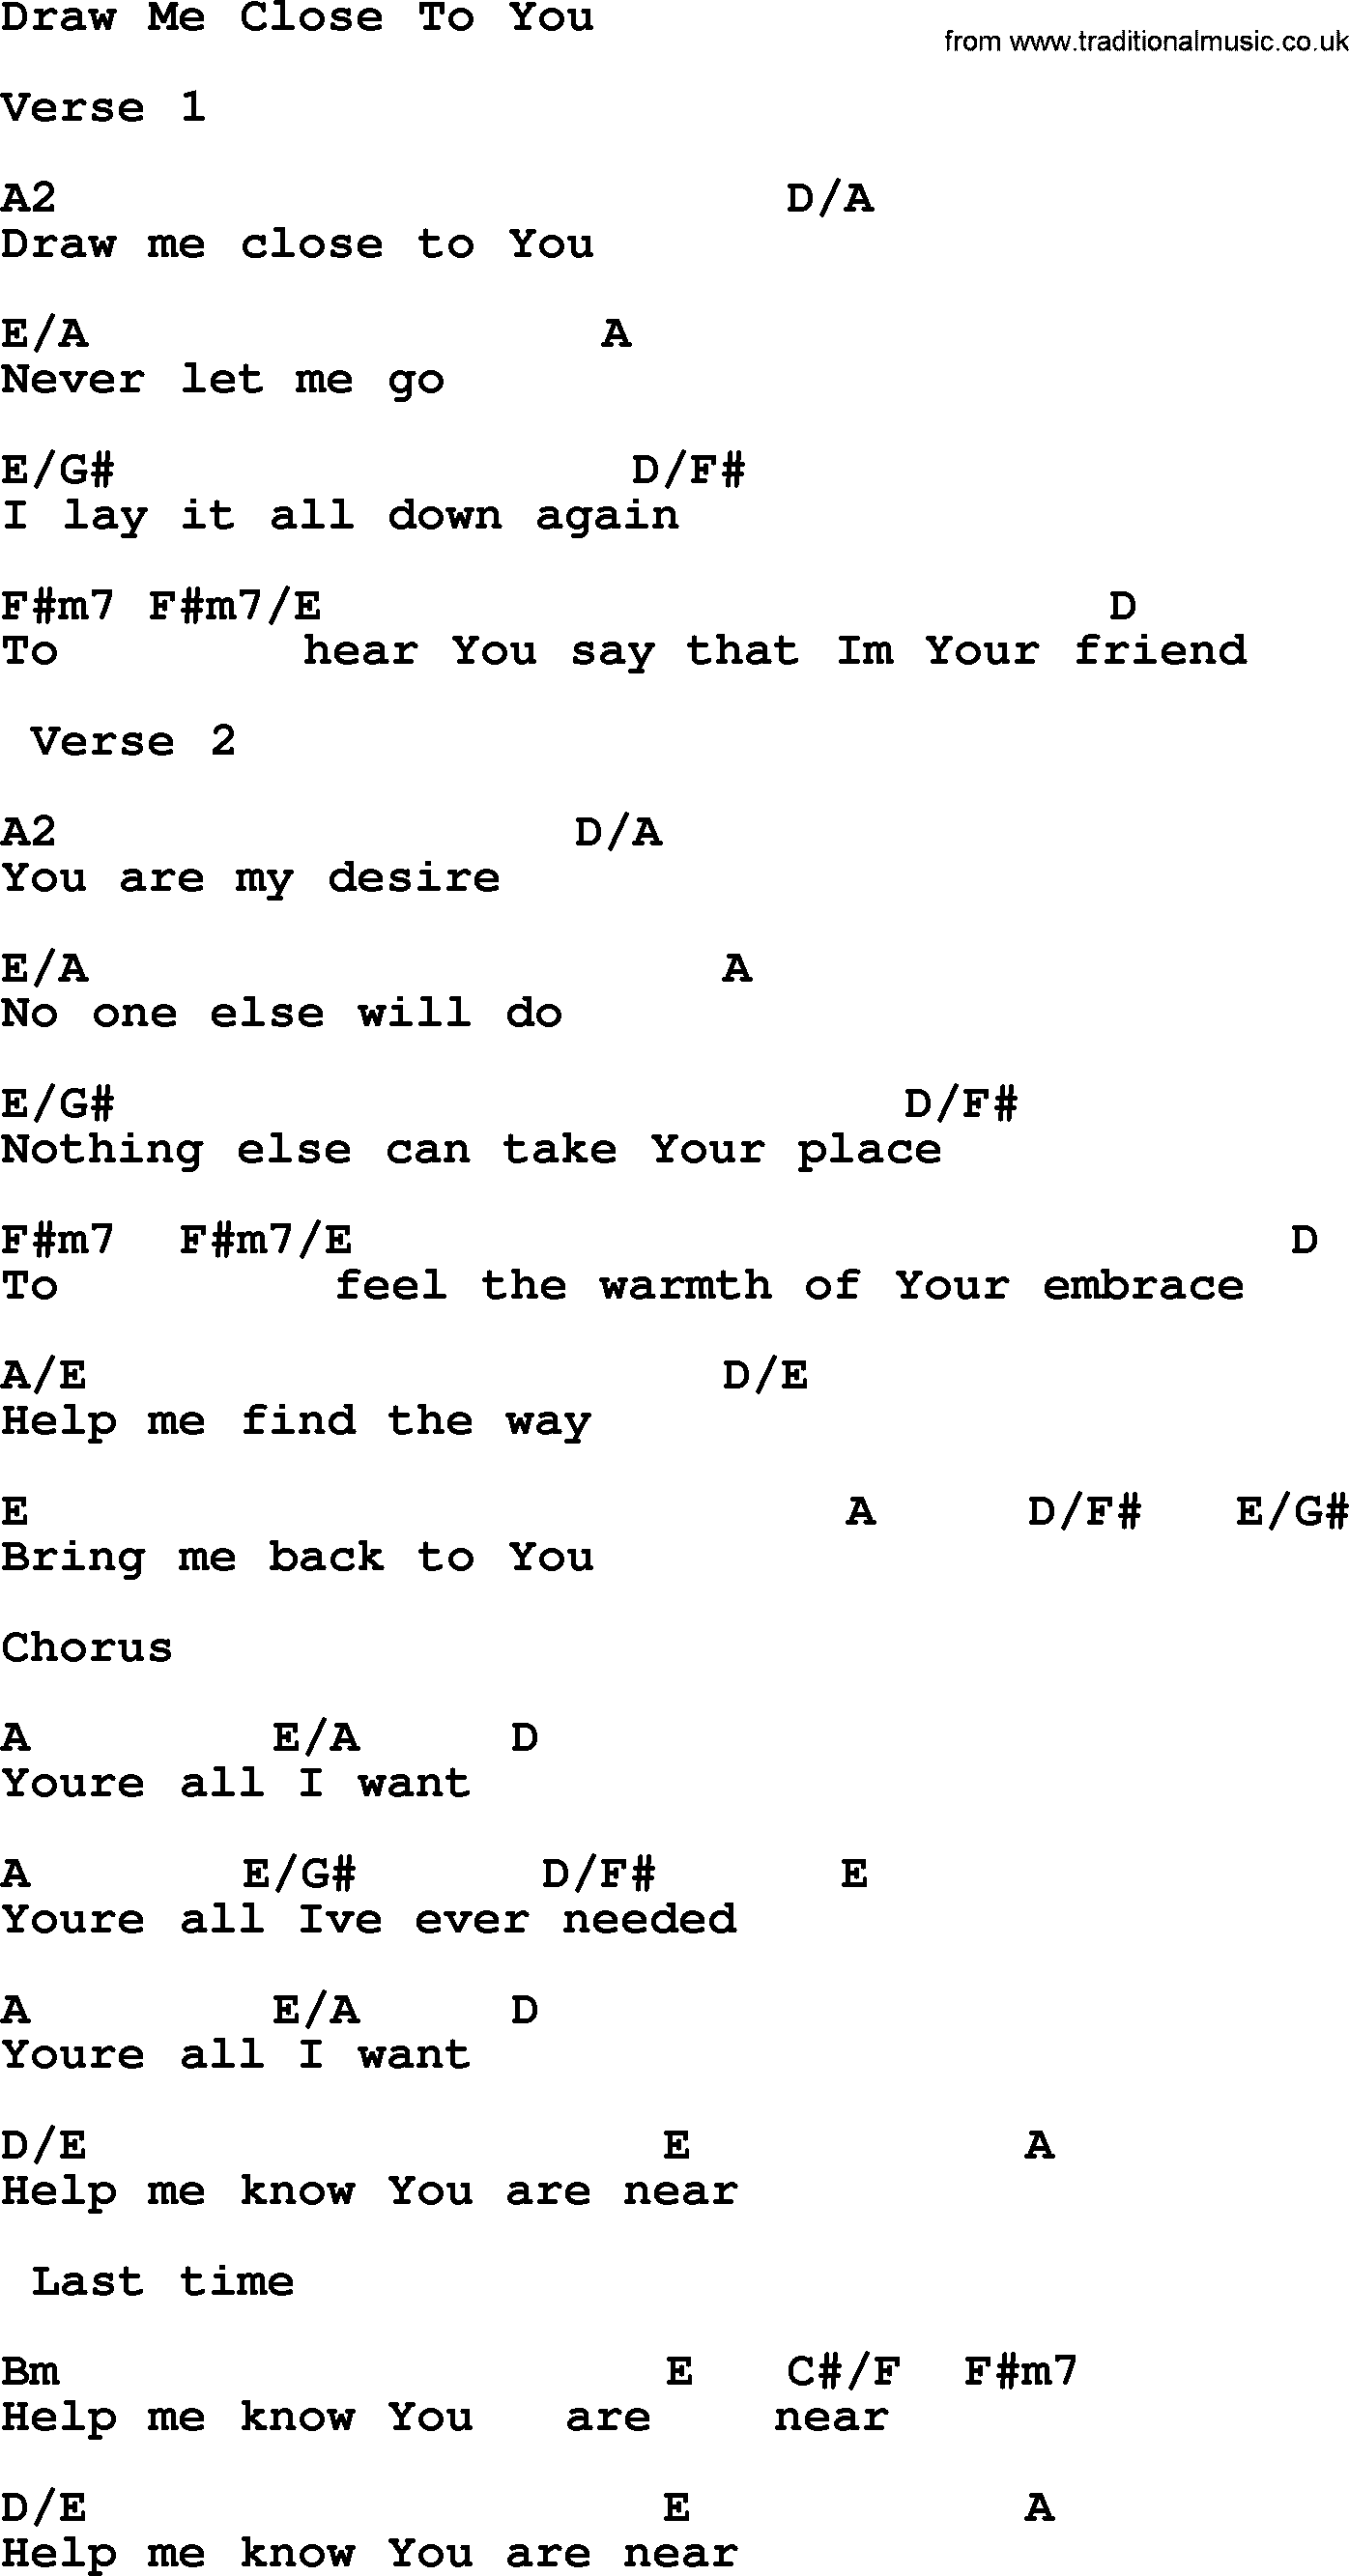 Funeral Hymn Draw Me Close To YouCRD, lyrics, and PDF